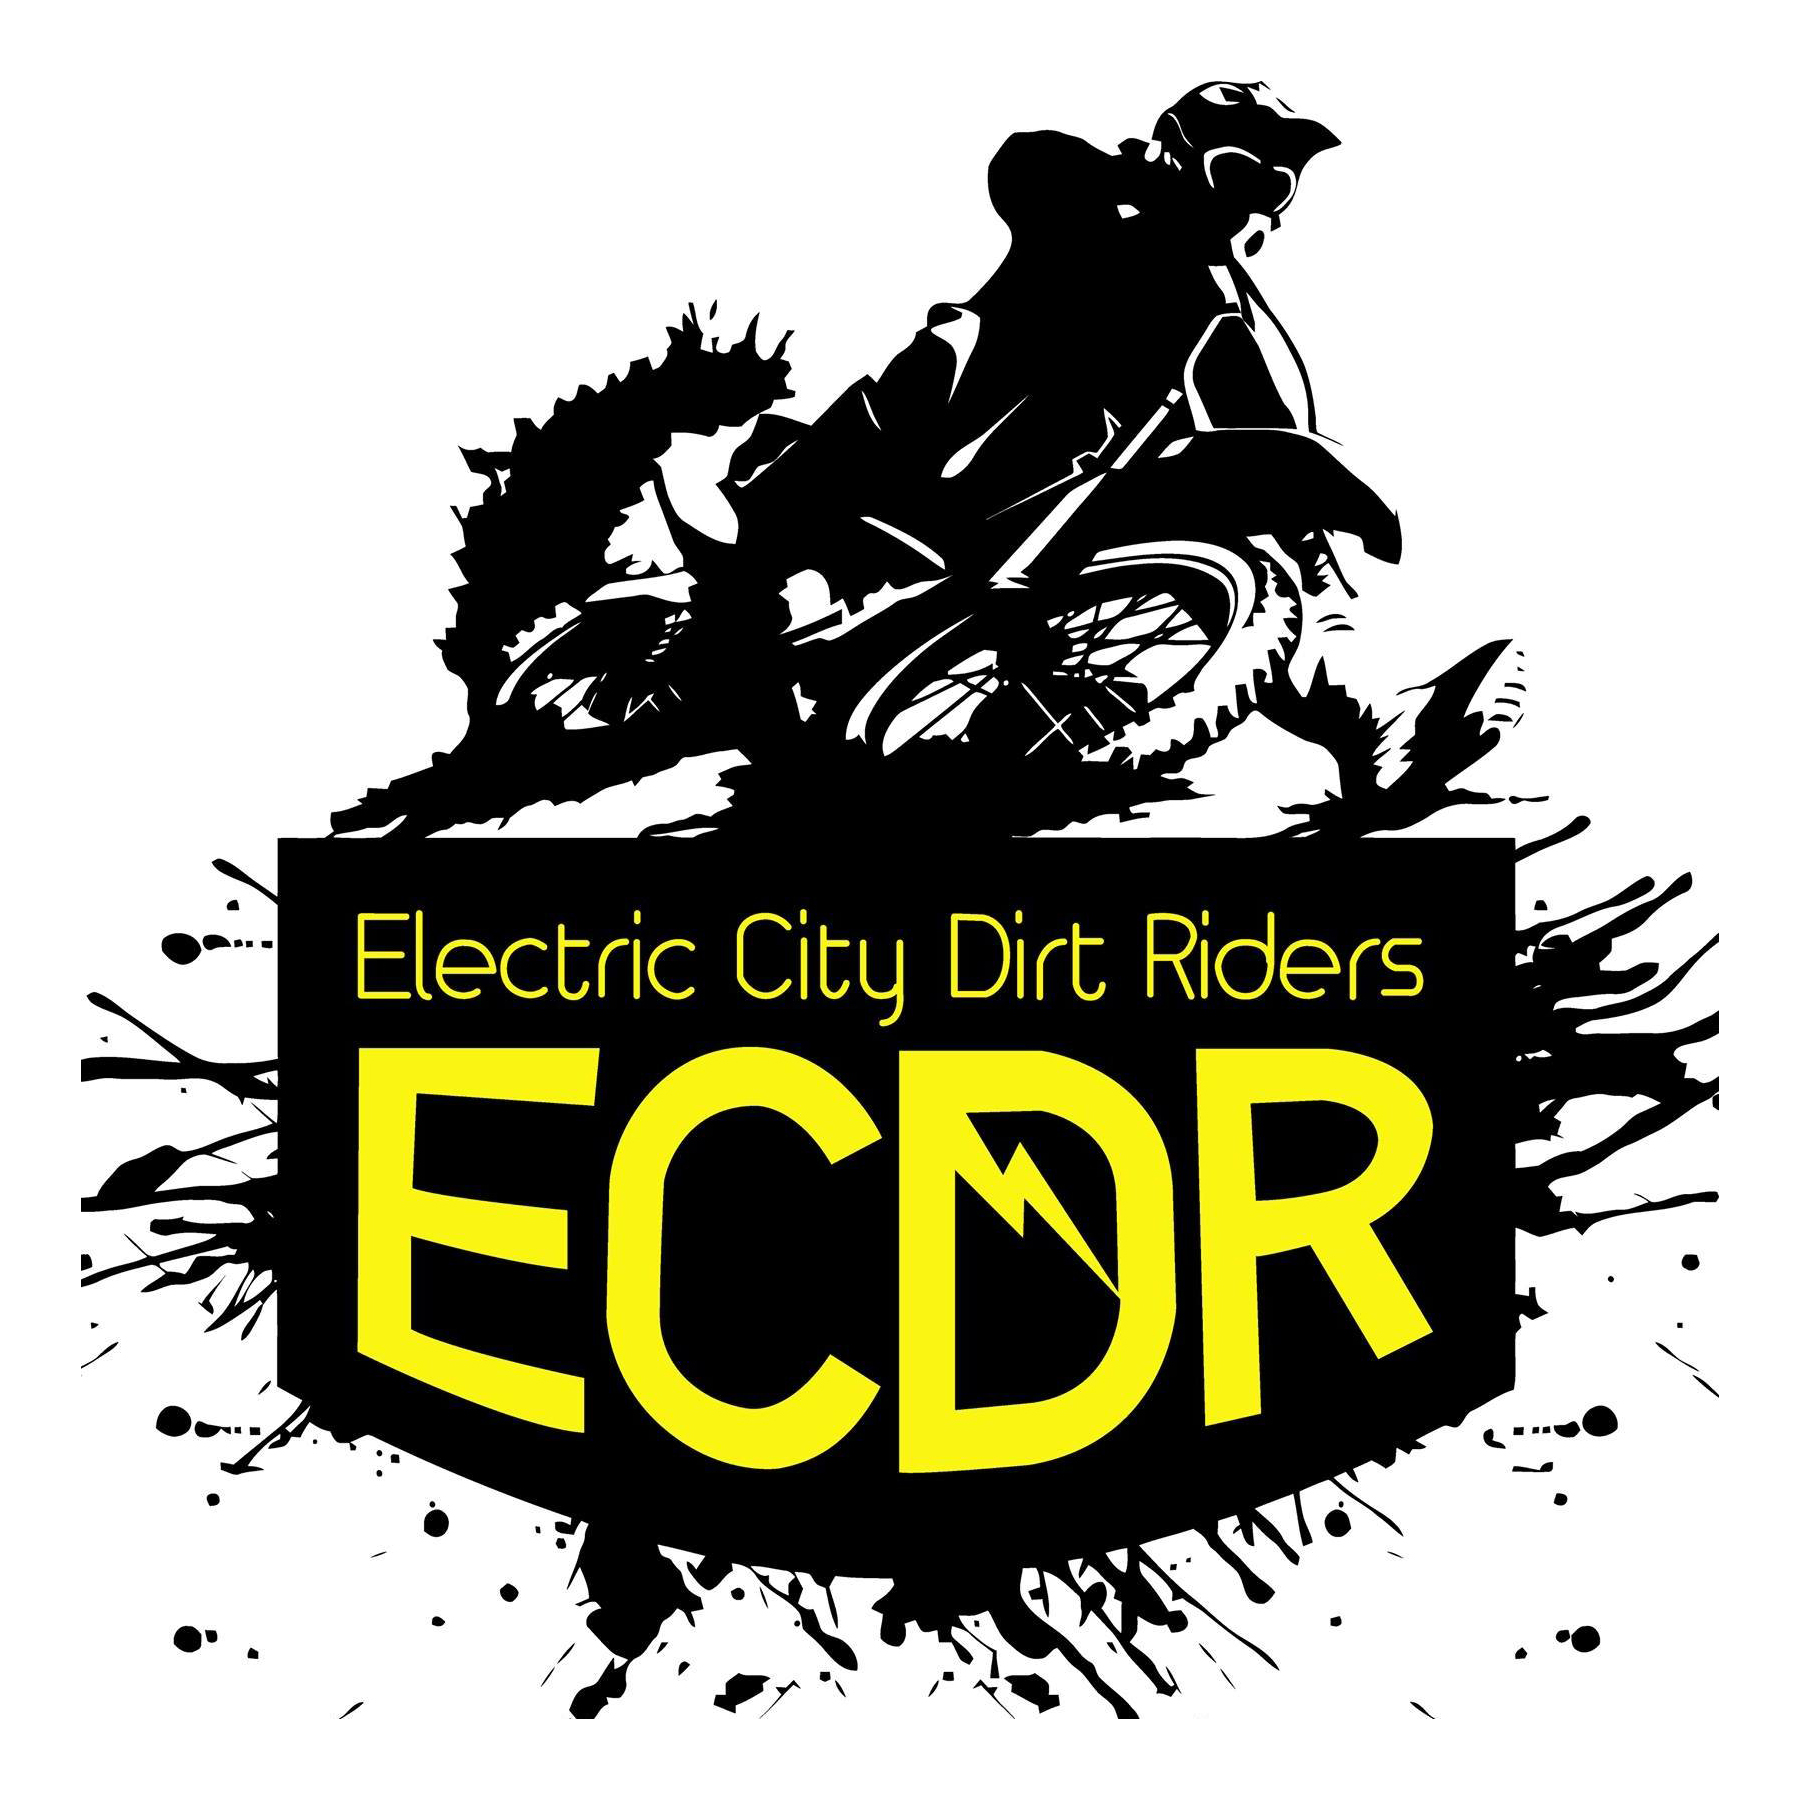 Electric City Dirt Riders